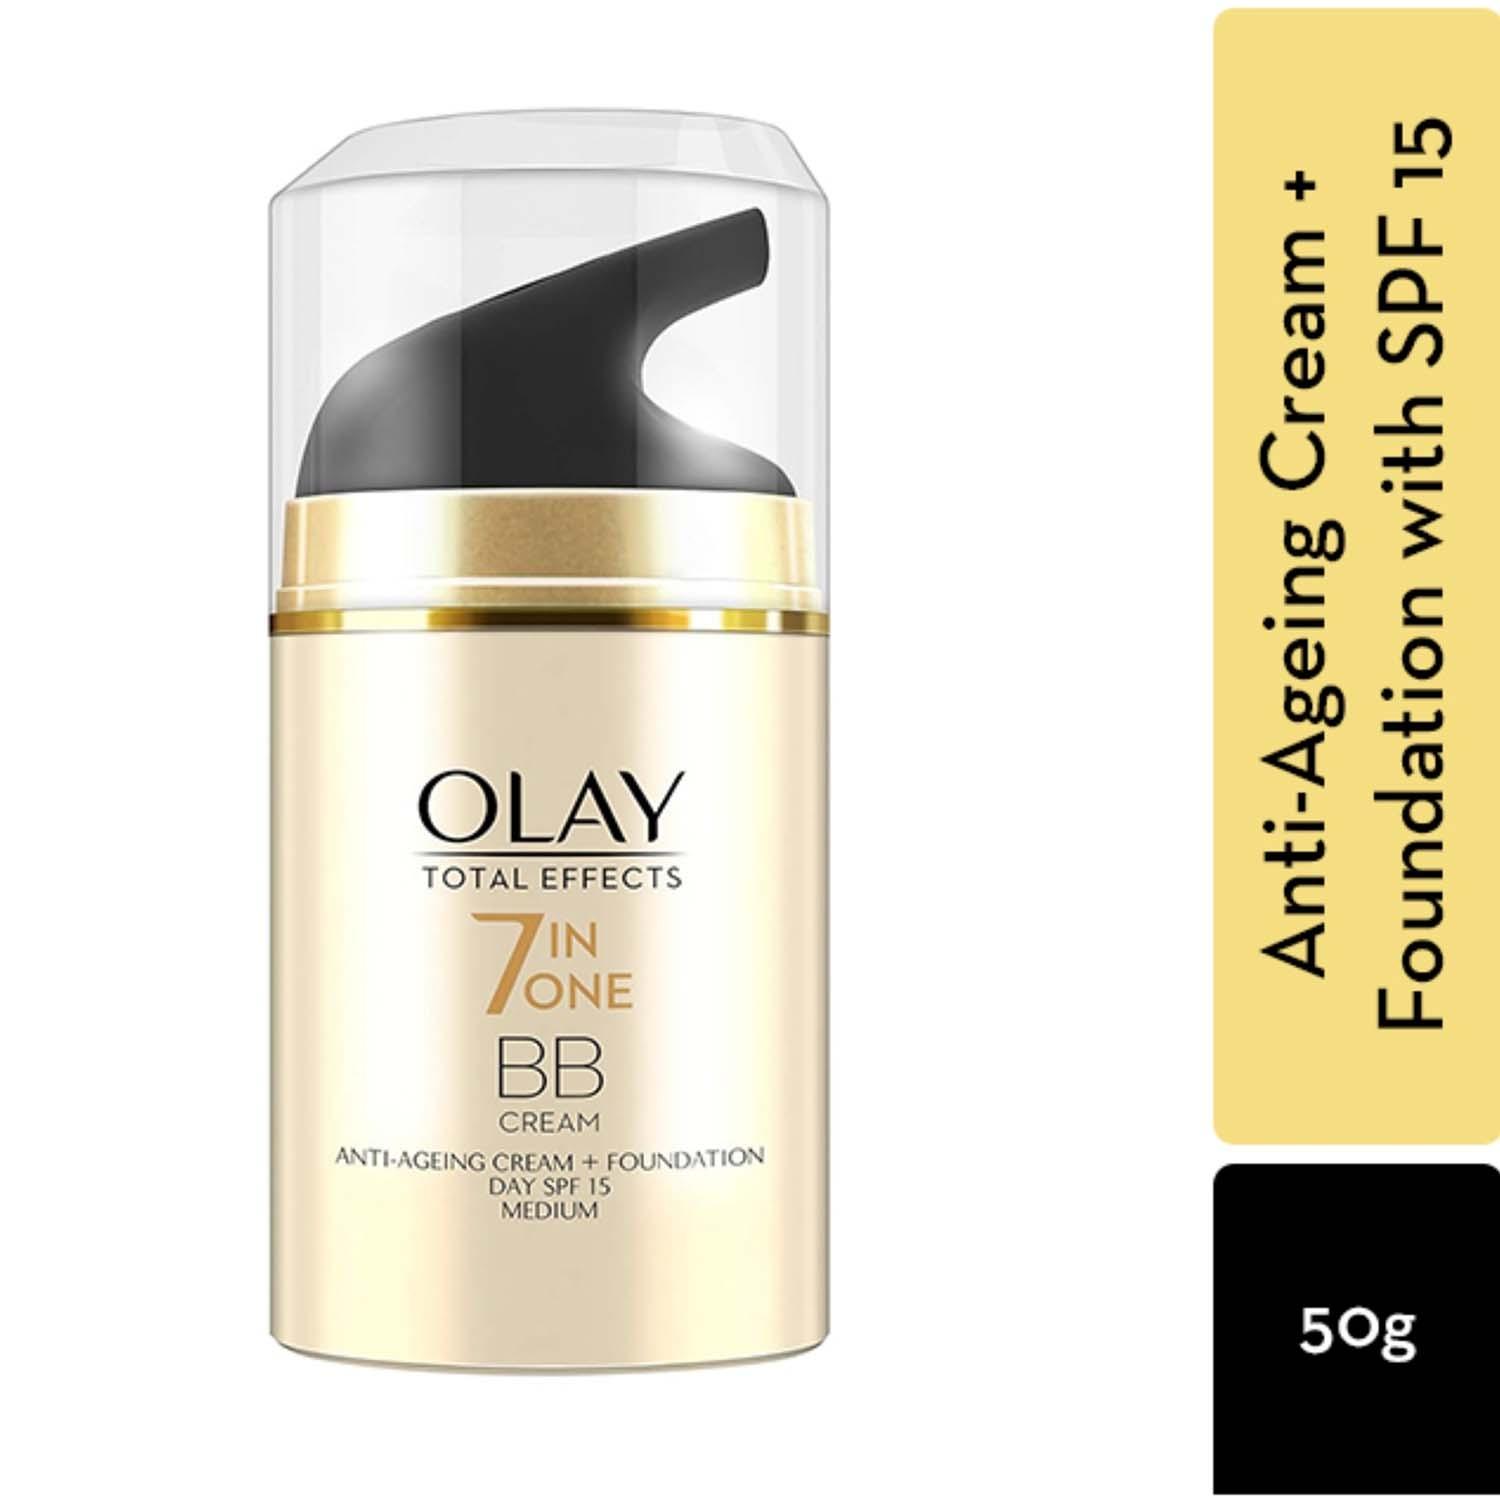 olay 7-in-1 total effects anti ageing touch of foundation moisturiser (50g)